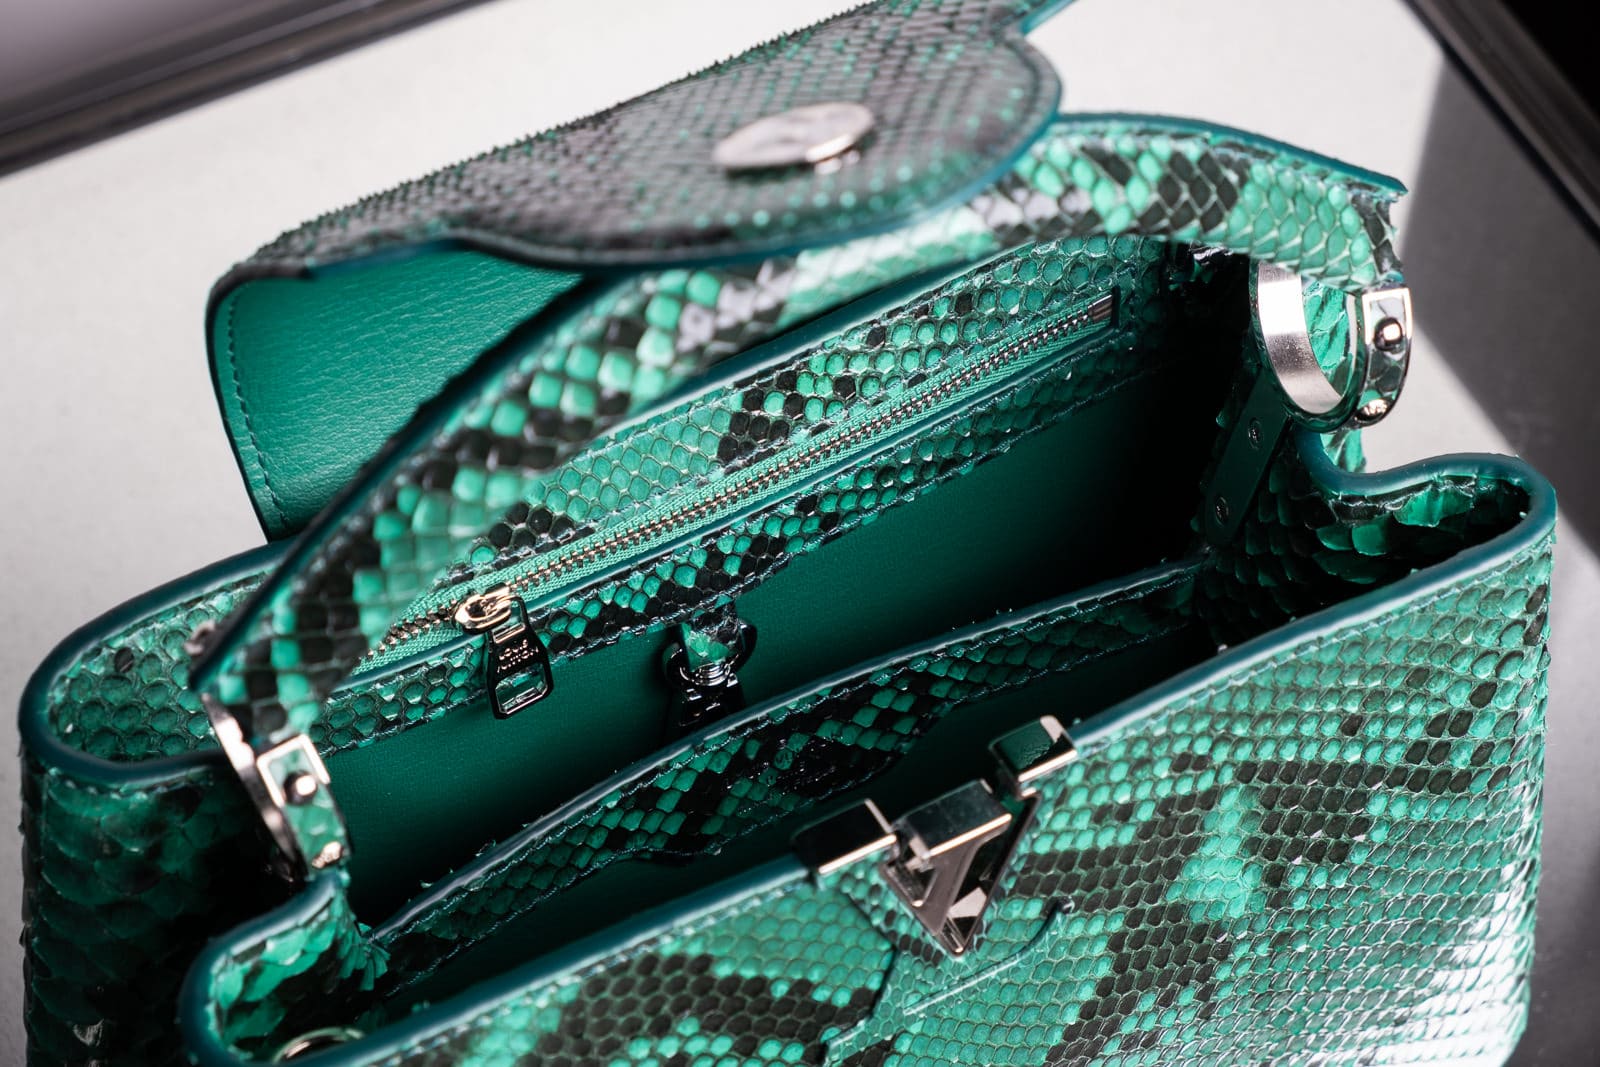 Your Louis Vuitton Bag Can Now Come In Exotic Skin! Here's How